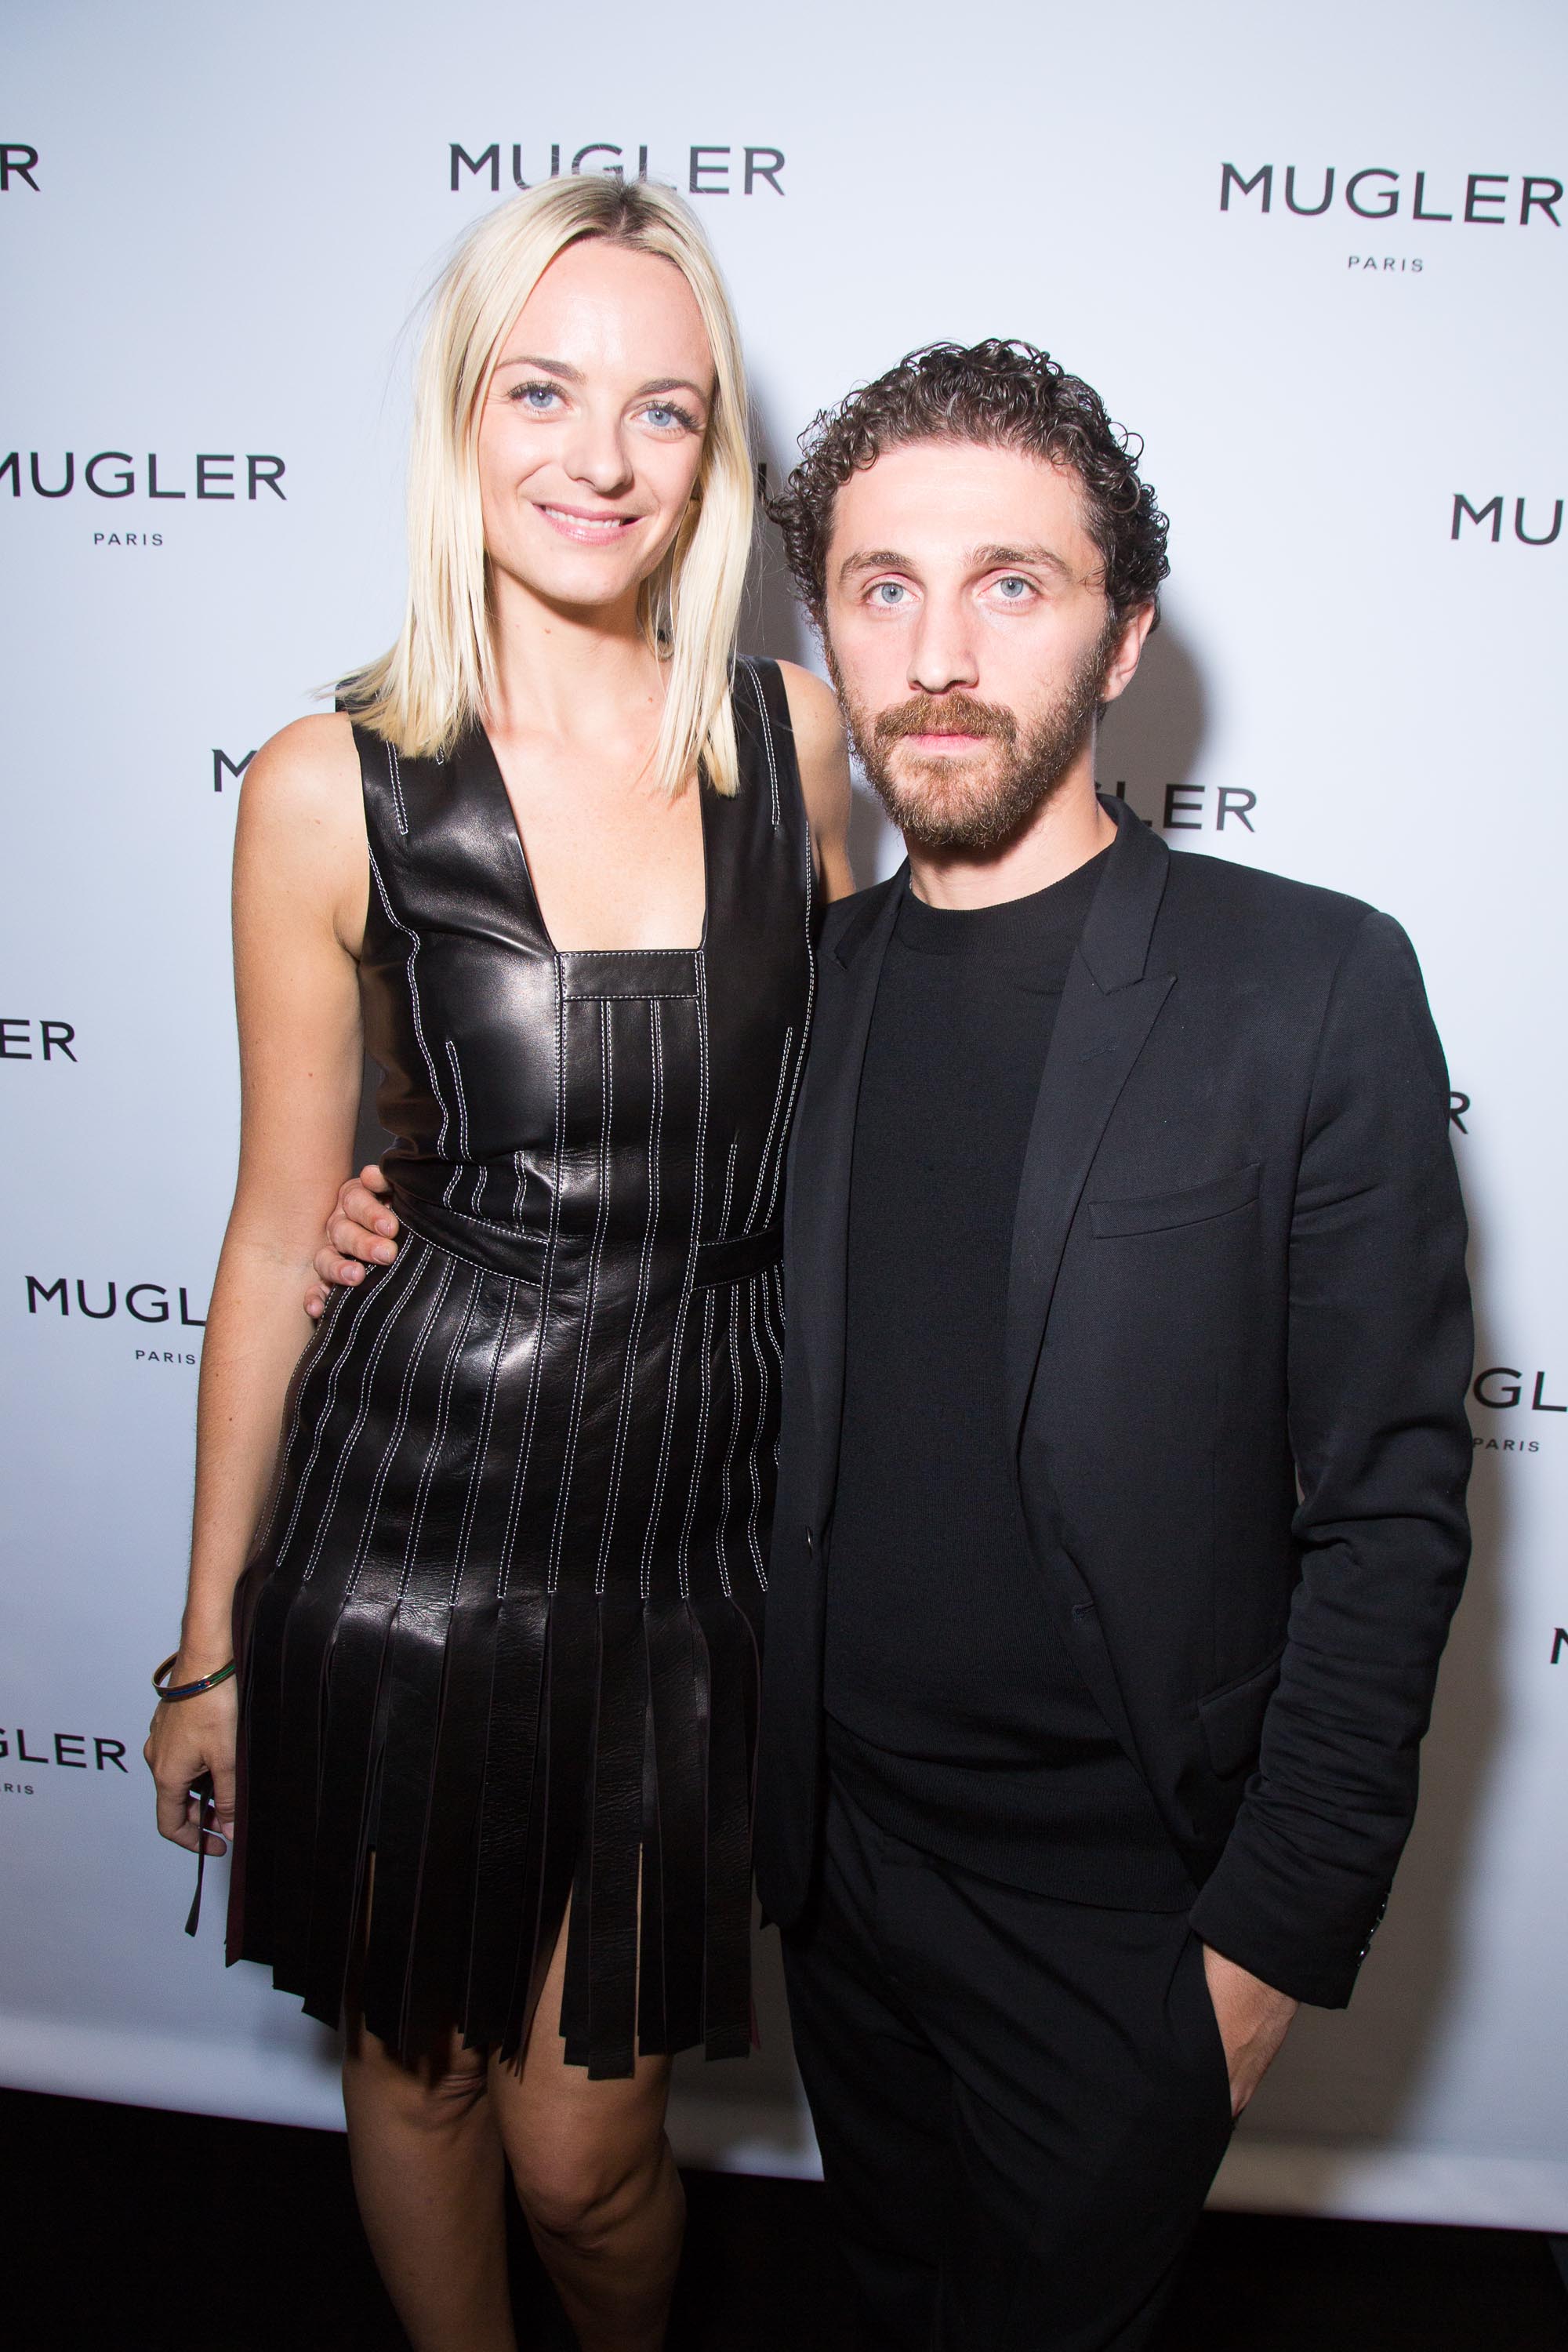 Virginie Courtin Clarins attends the Mugler Paris Store Party